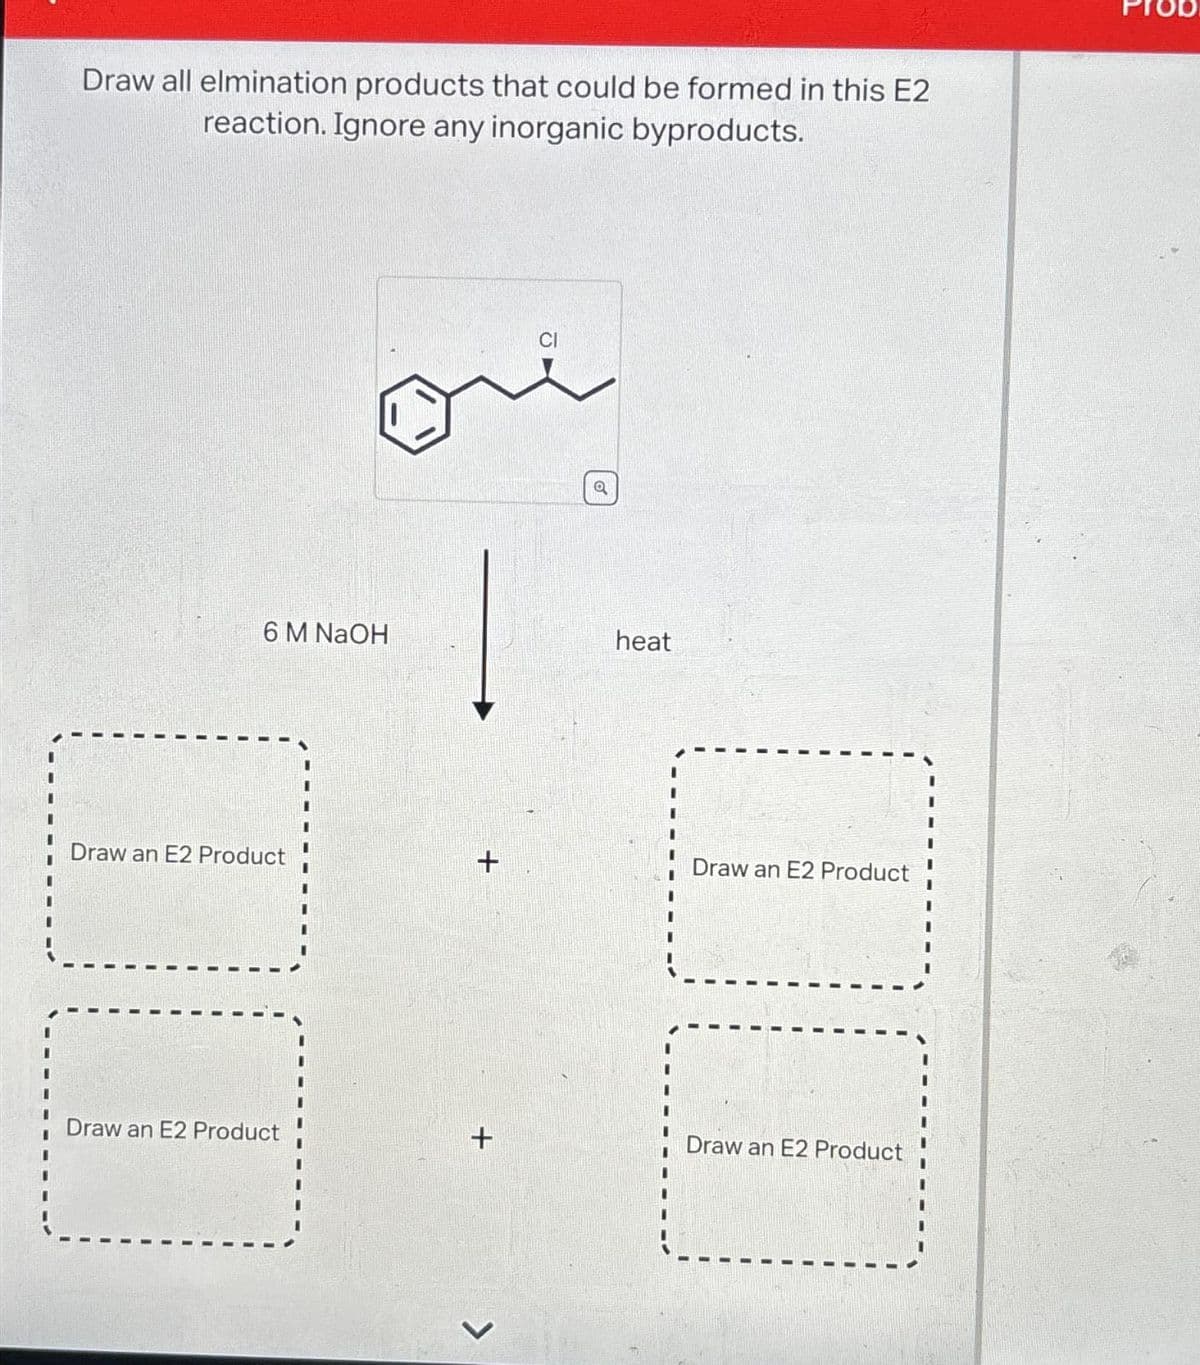 Draw all elmination products that could be formed in this E2
reaction. Ignore any inorganic byproducts.
6 M NaOH
Draw an E2 Product
0
Draw an E2 Product
+
+
>
CI
Q
heat
Draw an E2 Product
Draw an E2 Product